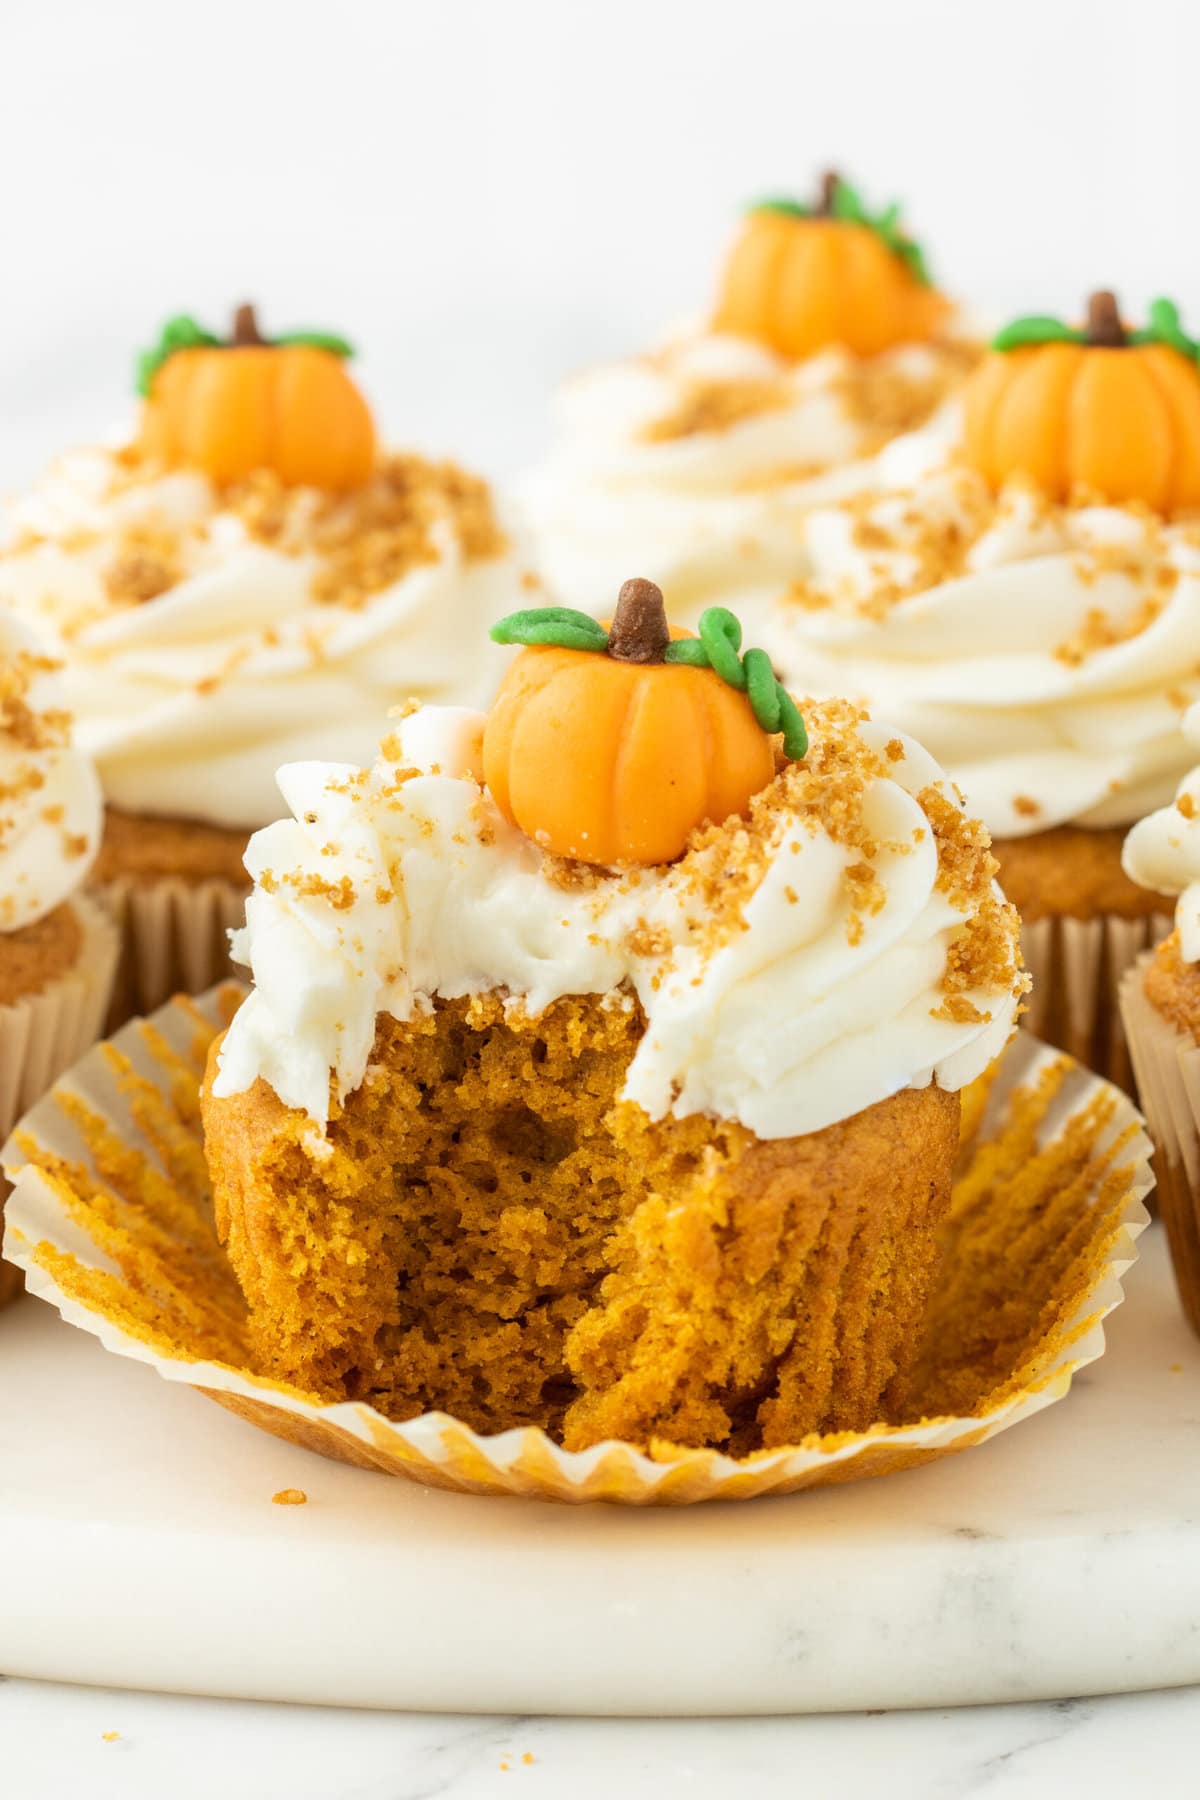 baked pumpkin cupcake frosted with cream cheese frosting and topped with a marzipan candy pumpkin